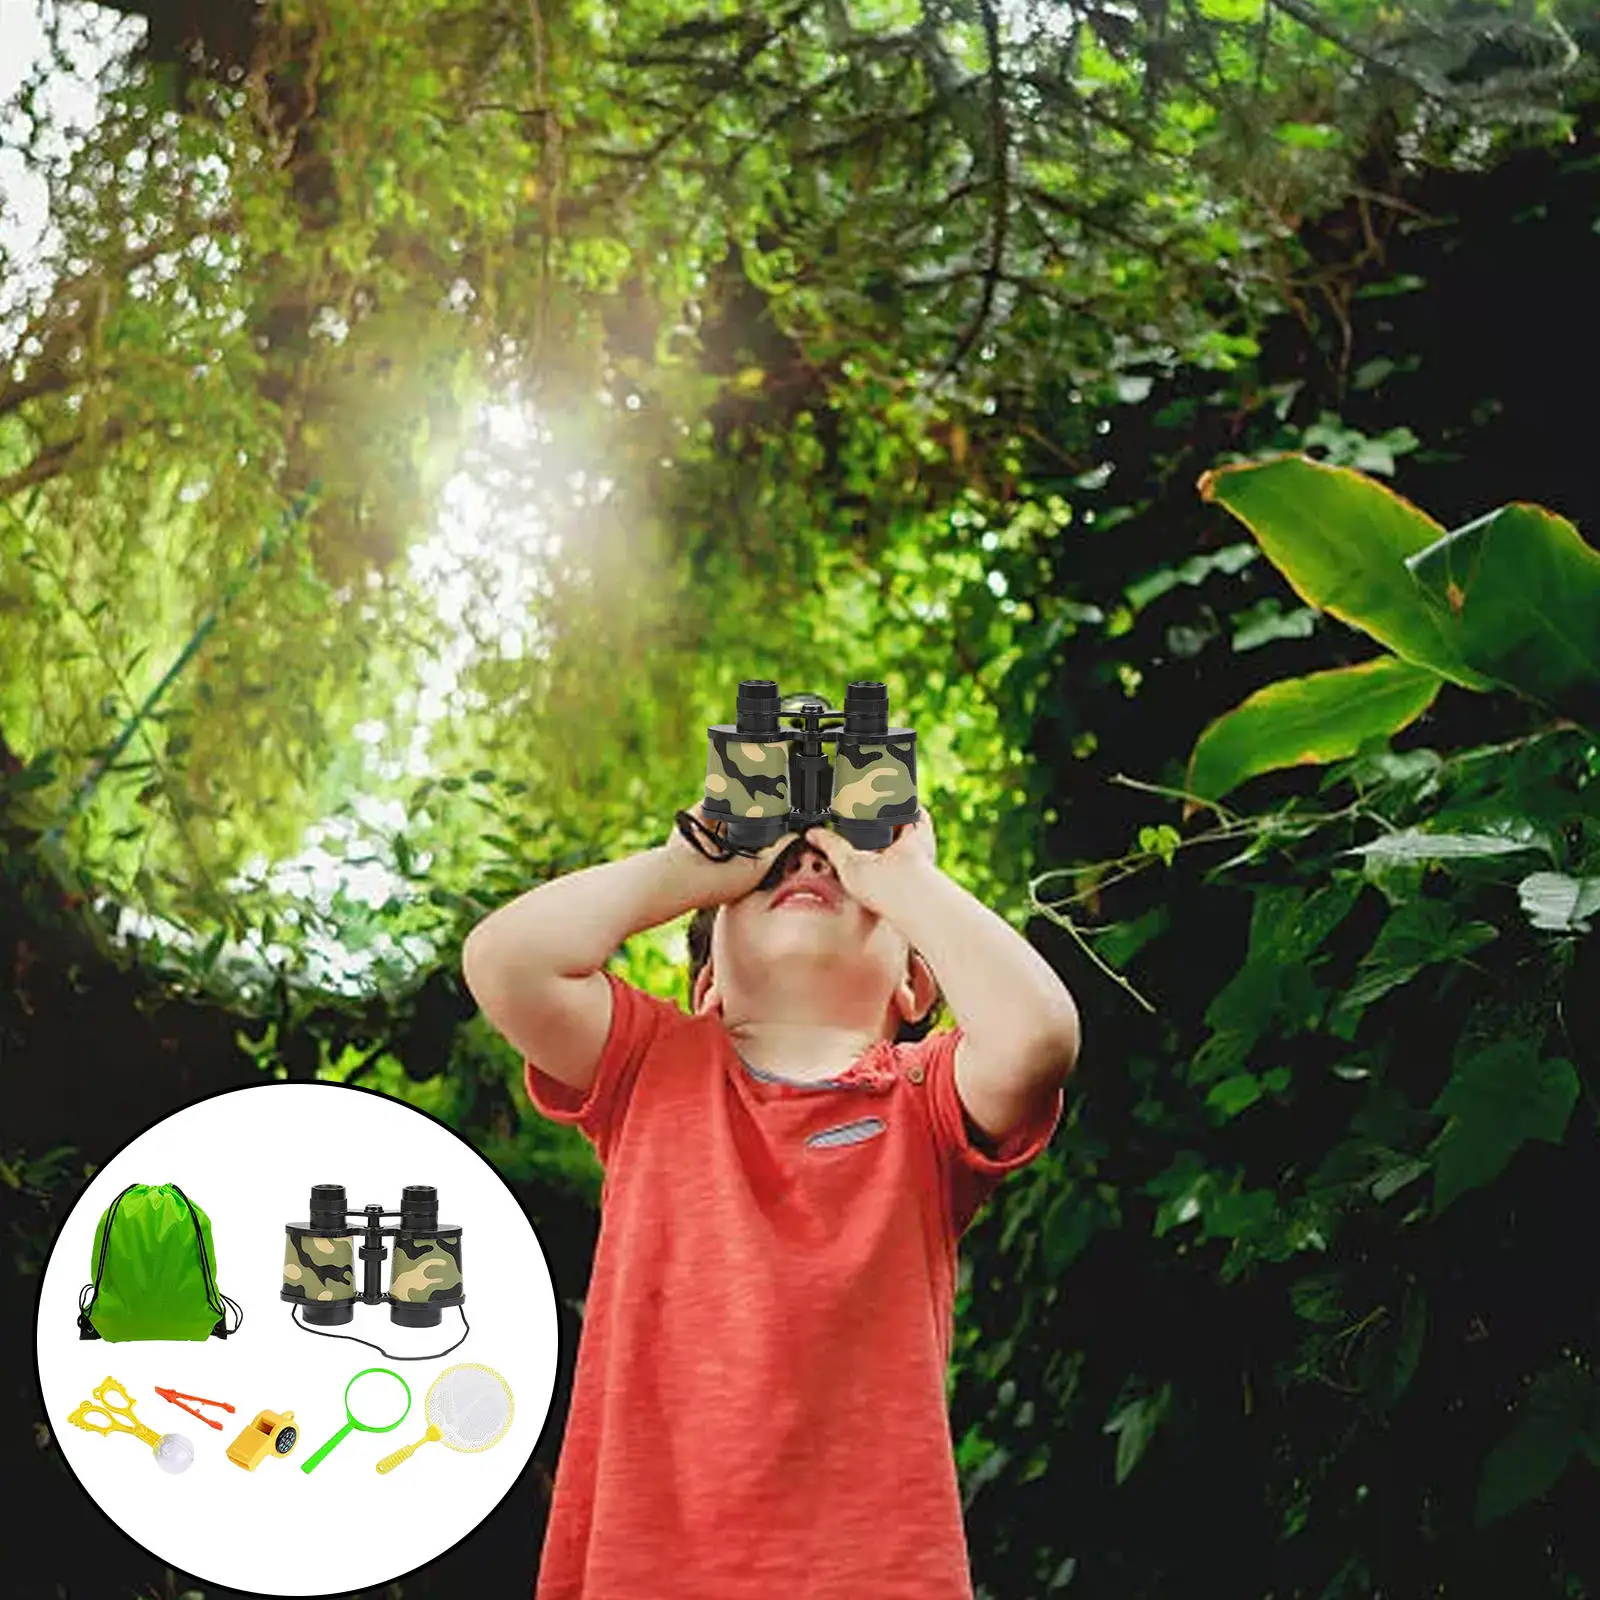 Magnifying Glass Exploration Equipment Outdoor Adventure Kits Flashlight Bug Container Compass IAMGlobal Kids Explorer Kit Binoculars Backpack for Camping Hiking Nature Explorer Kit Whistle 